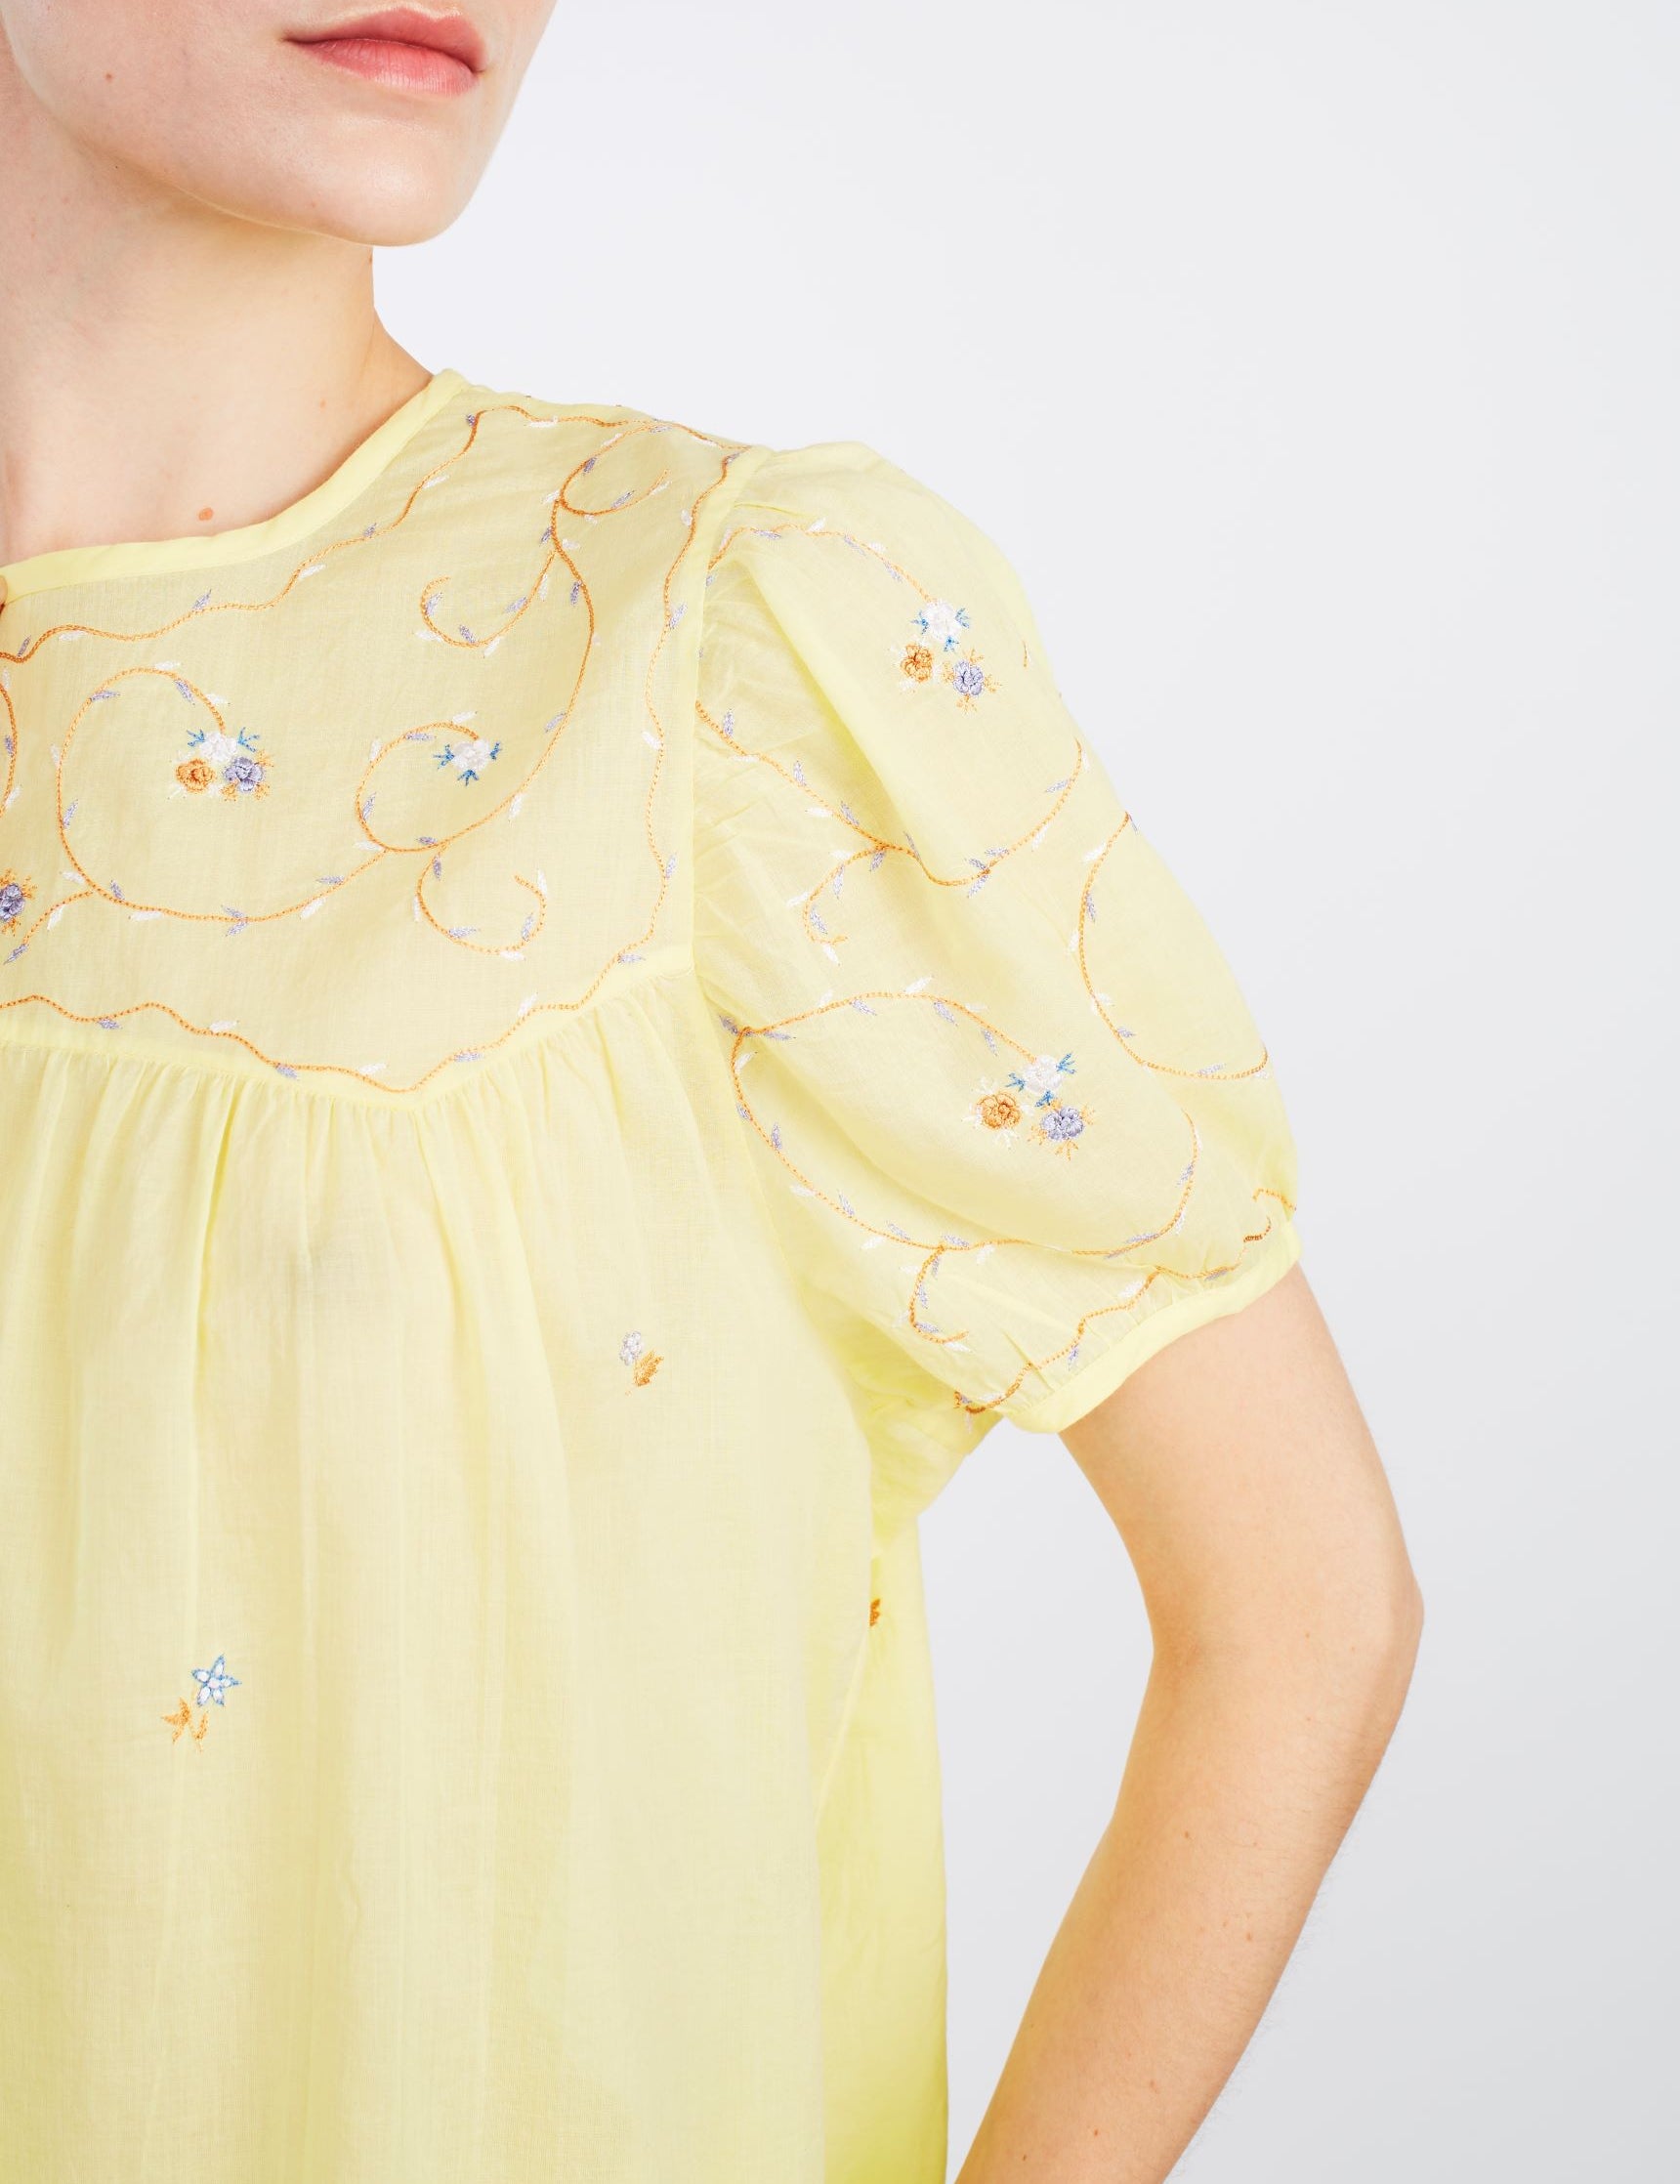 Sleeve detail of Olympia Sweet Lemon Top by Thierry Colson